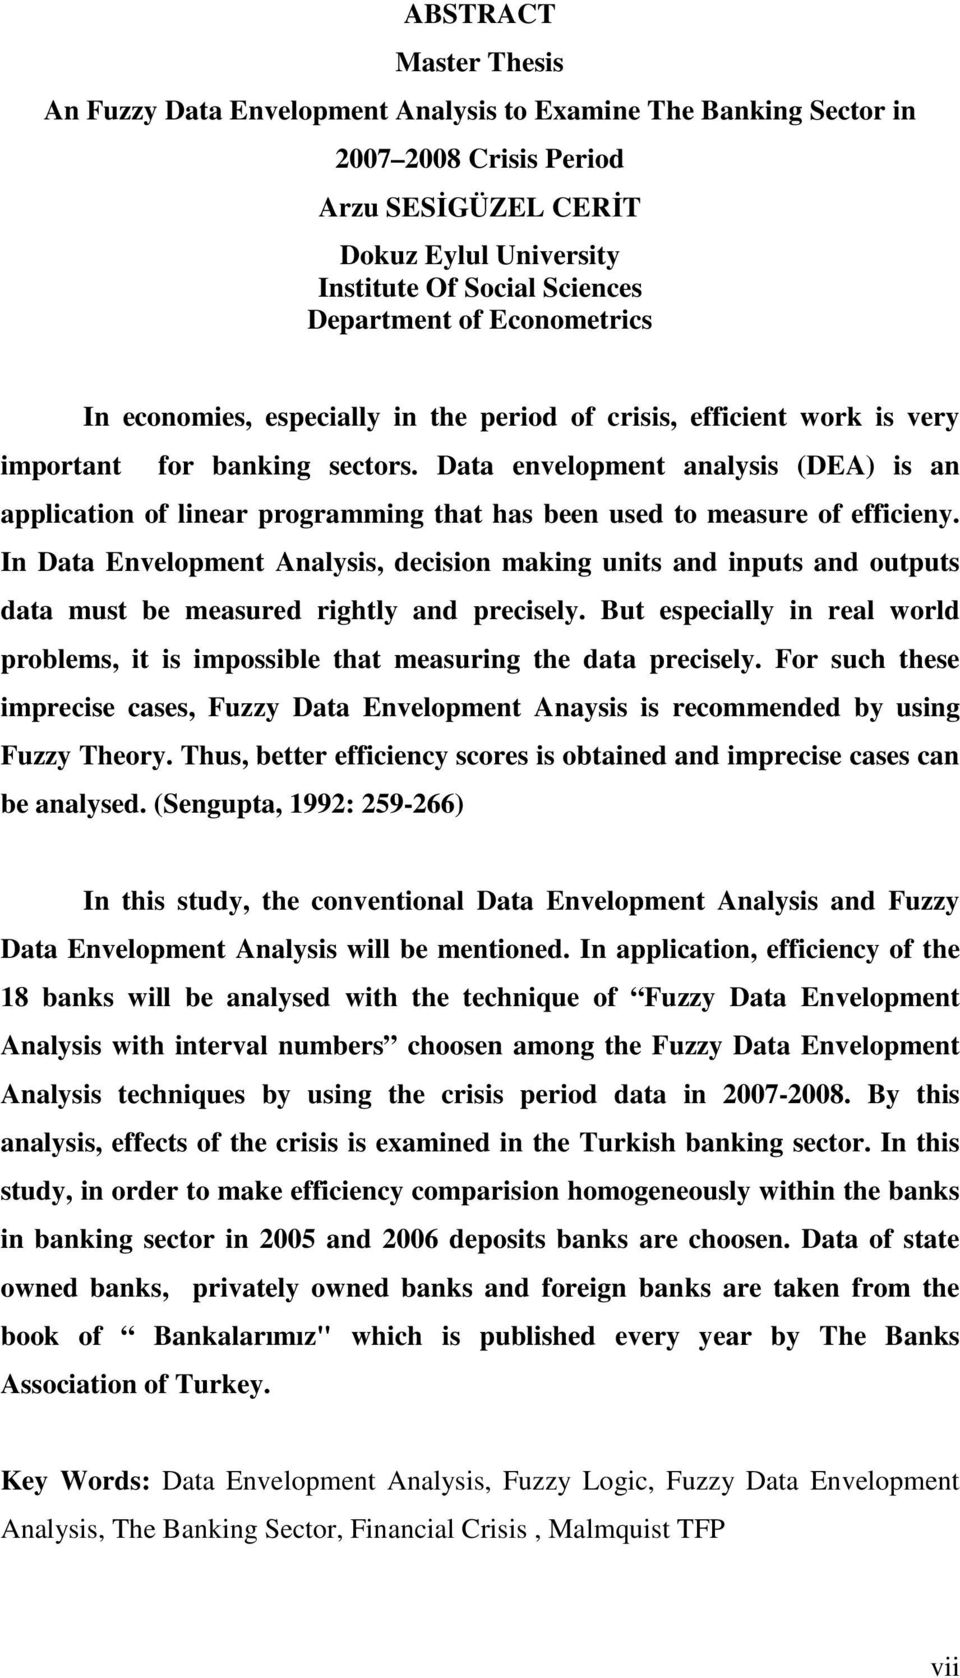 Data envelopment analysis (DEA) is an application of linear programming that has been used to measure of efficieny.